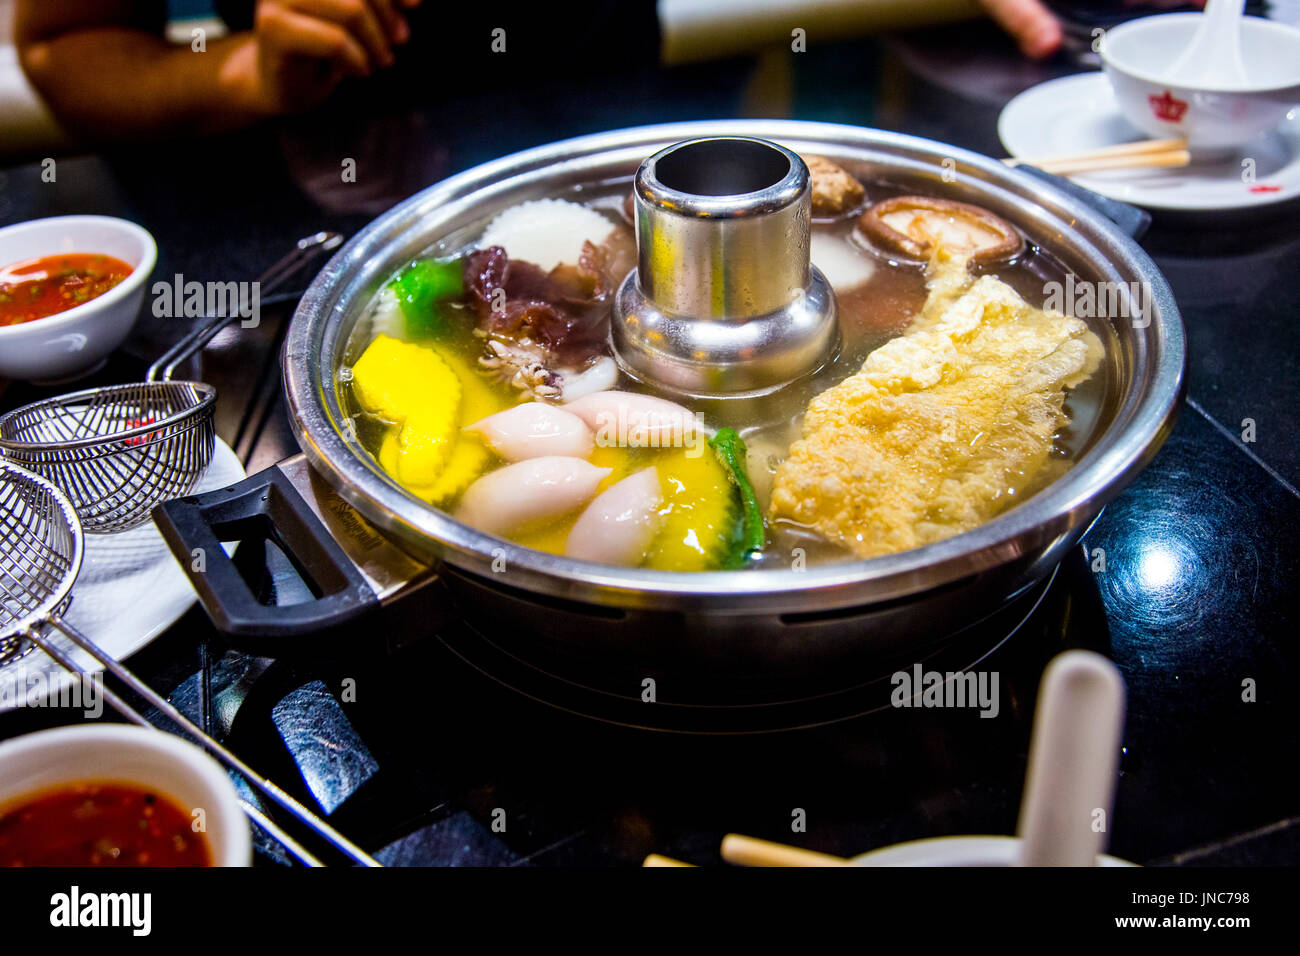 Thai hotpot (Tom Yum soup) at a restaurant, food cooked at the table Stock Photo